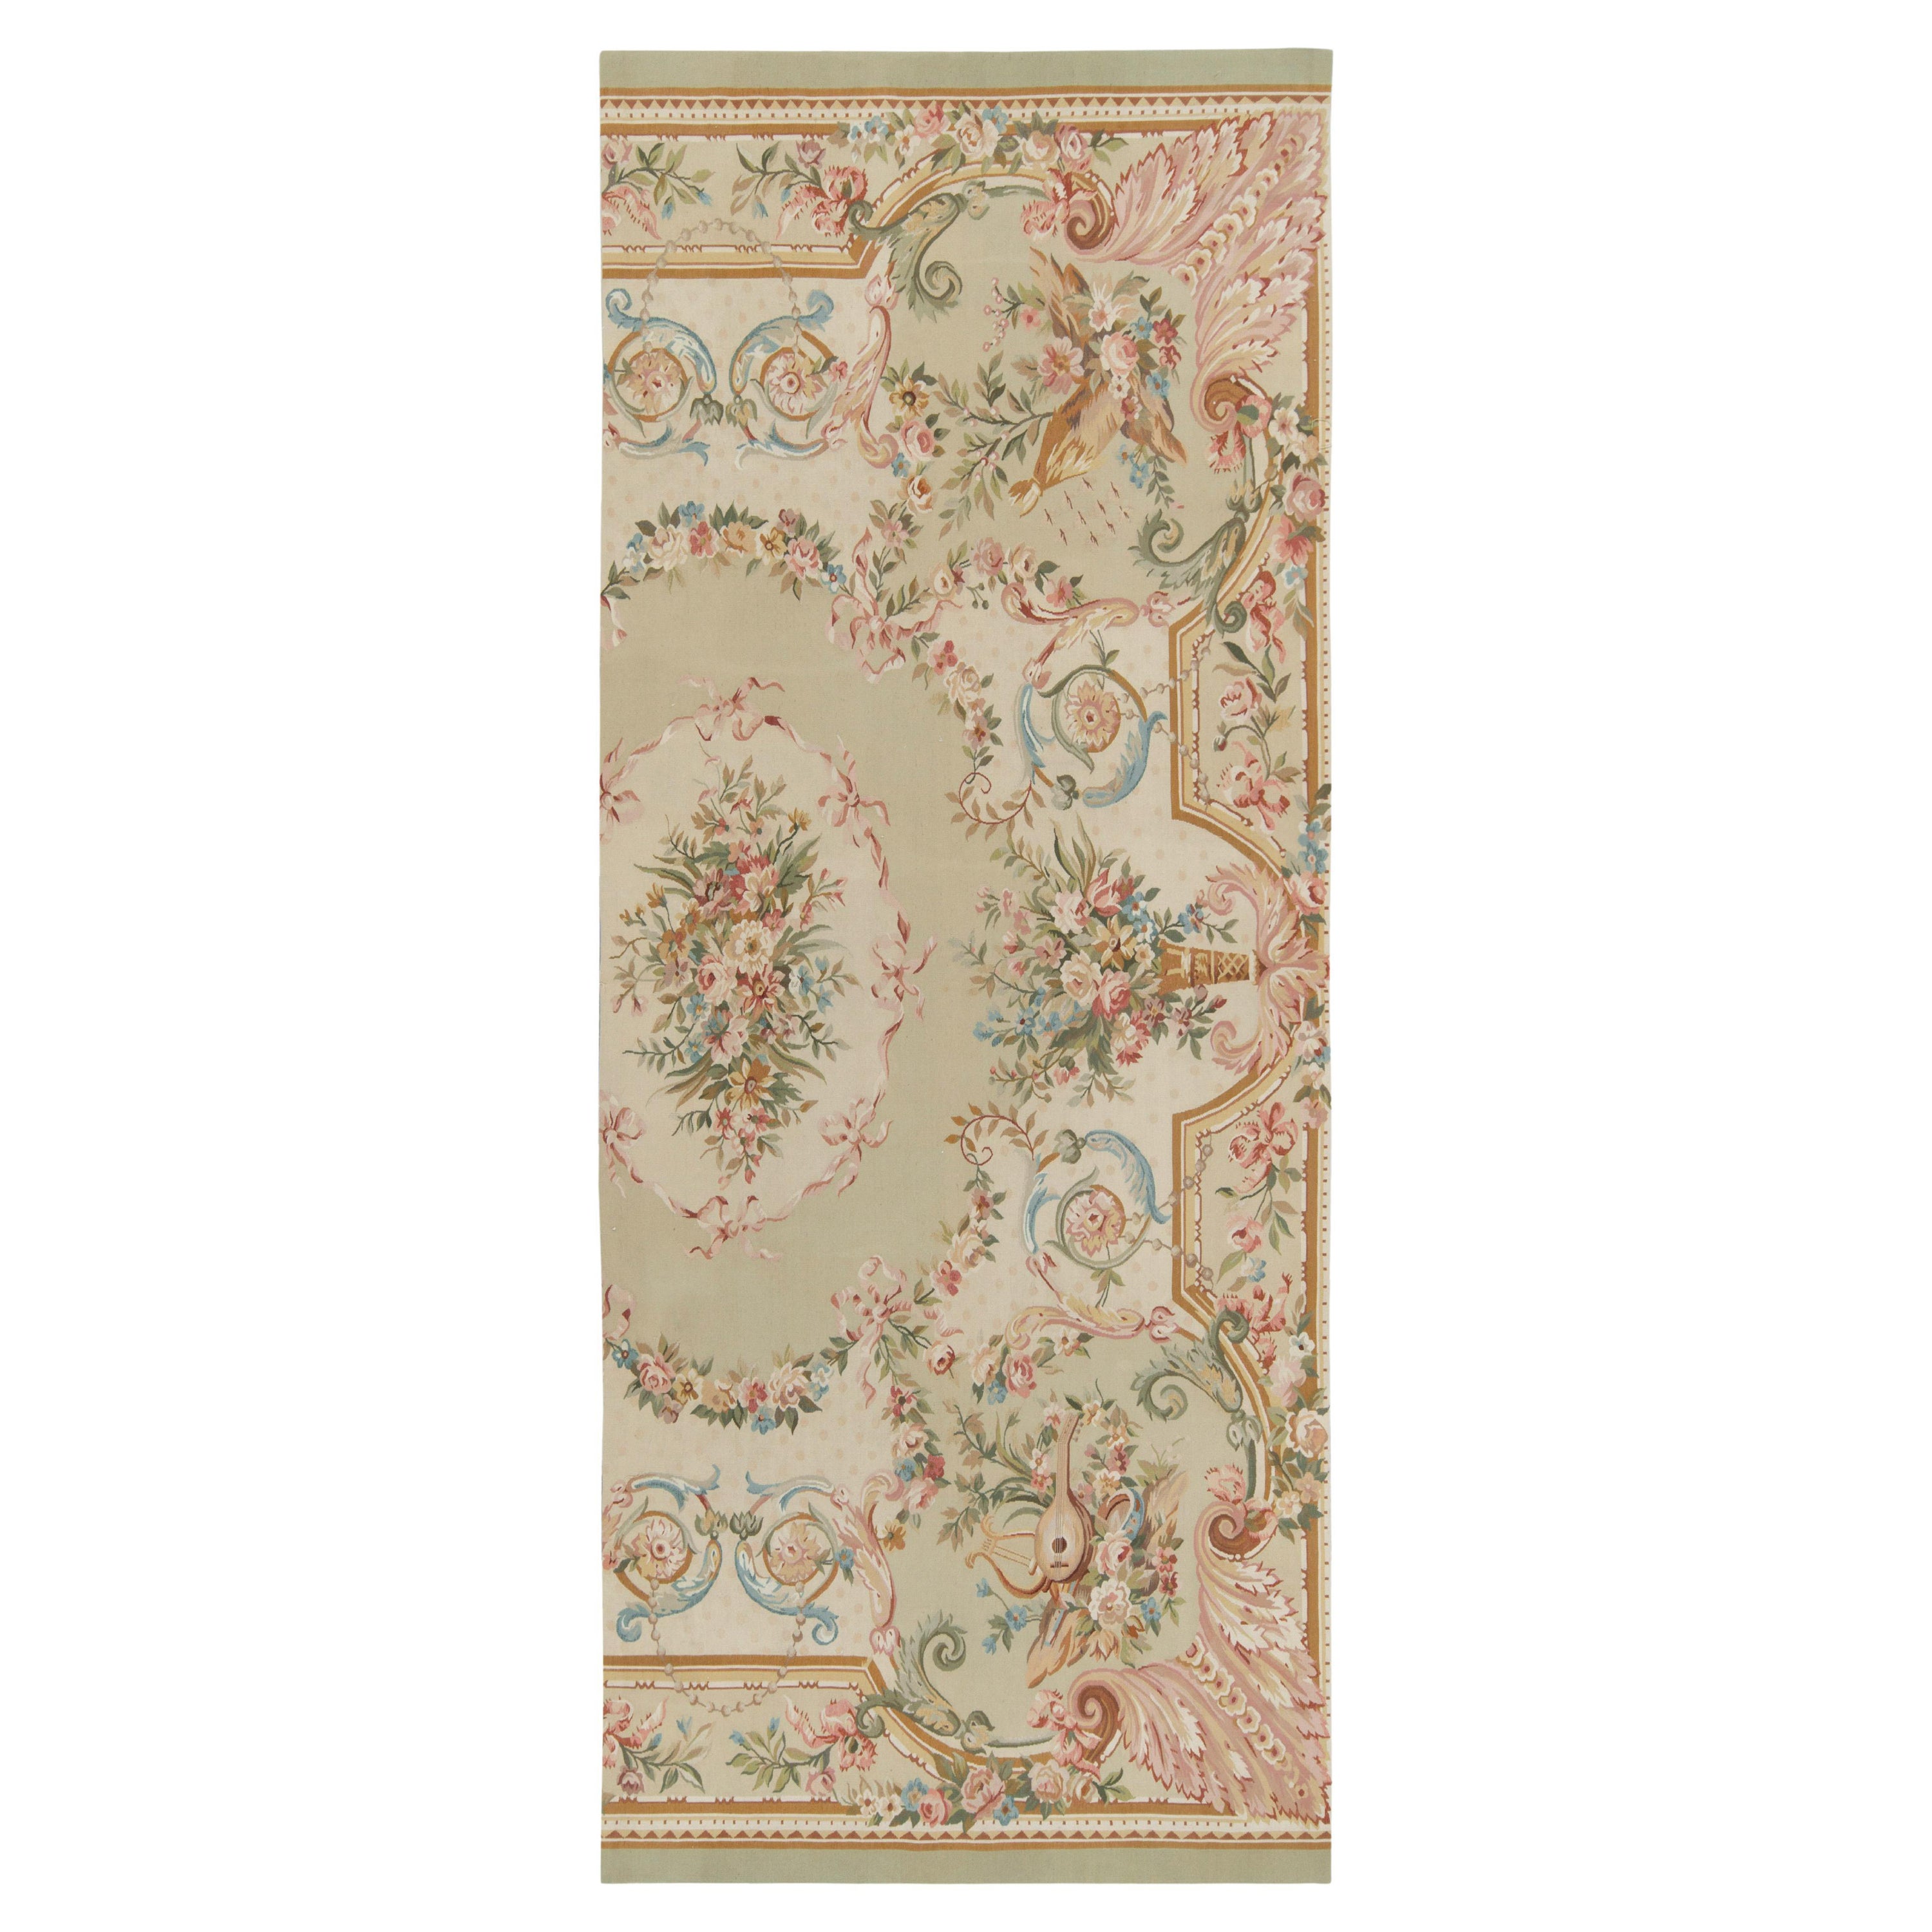 Rug & Kilim's Handwoven Aubusson Flat Weave Style Green, Pink, Beige Floral Rug